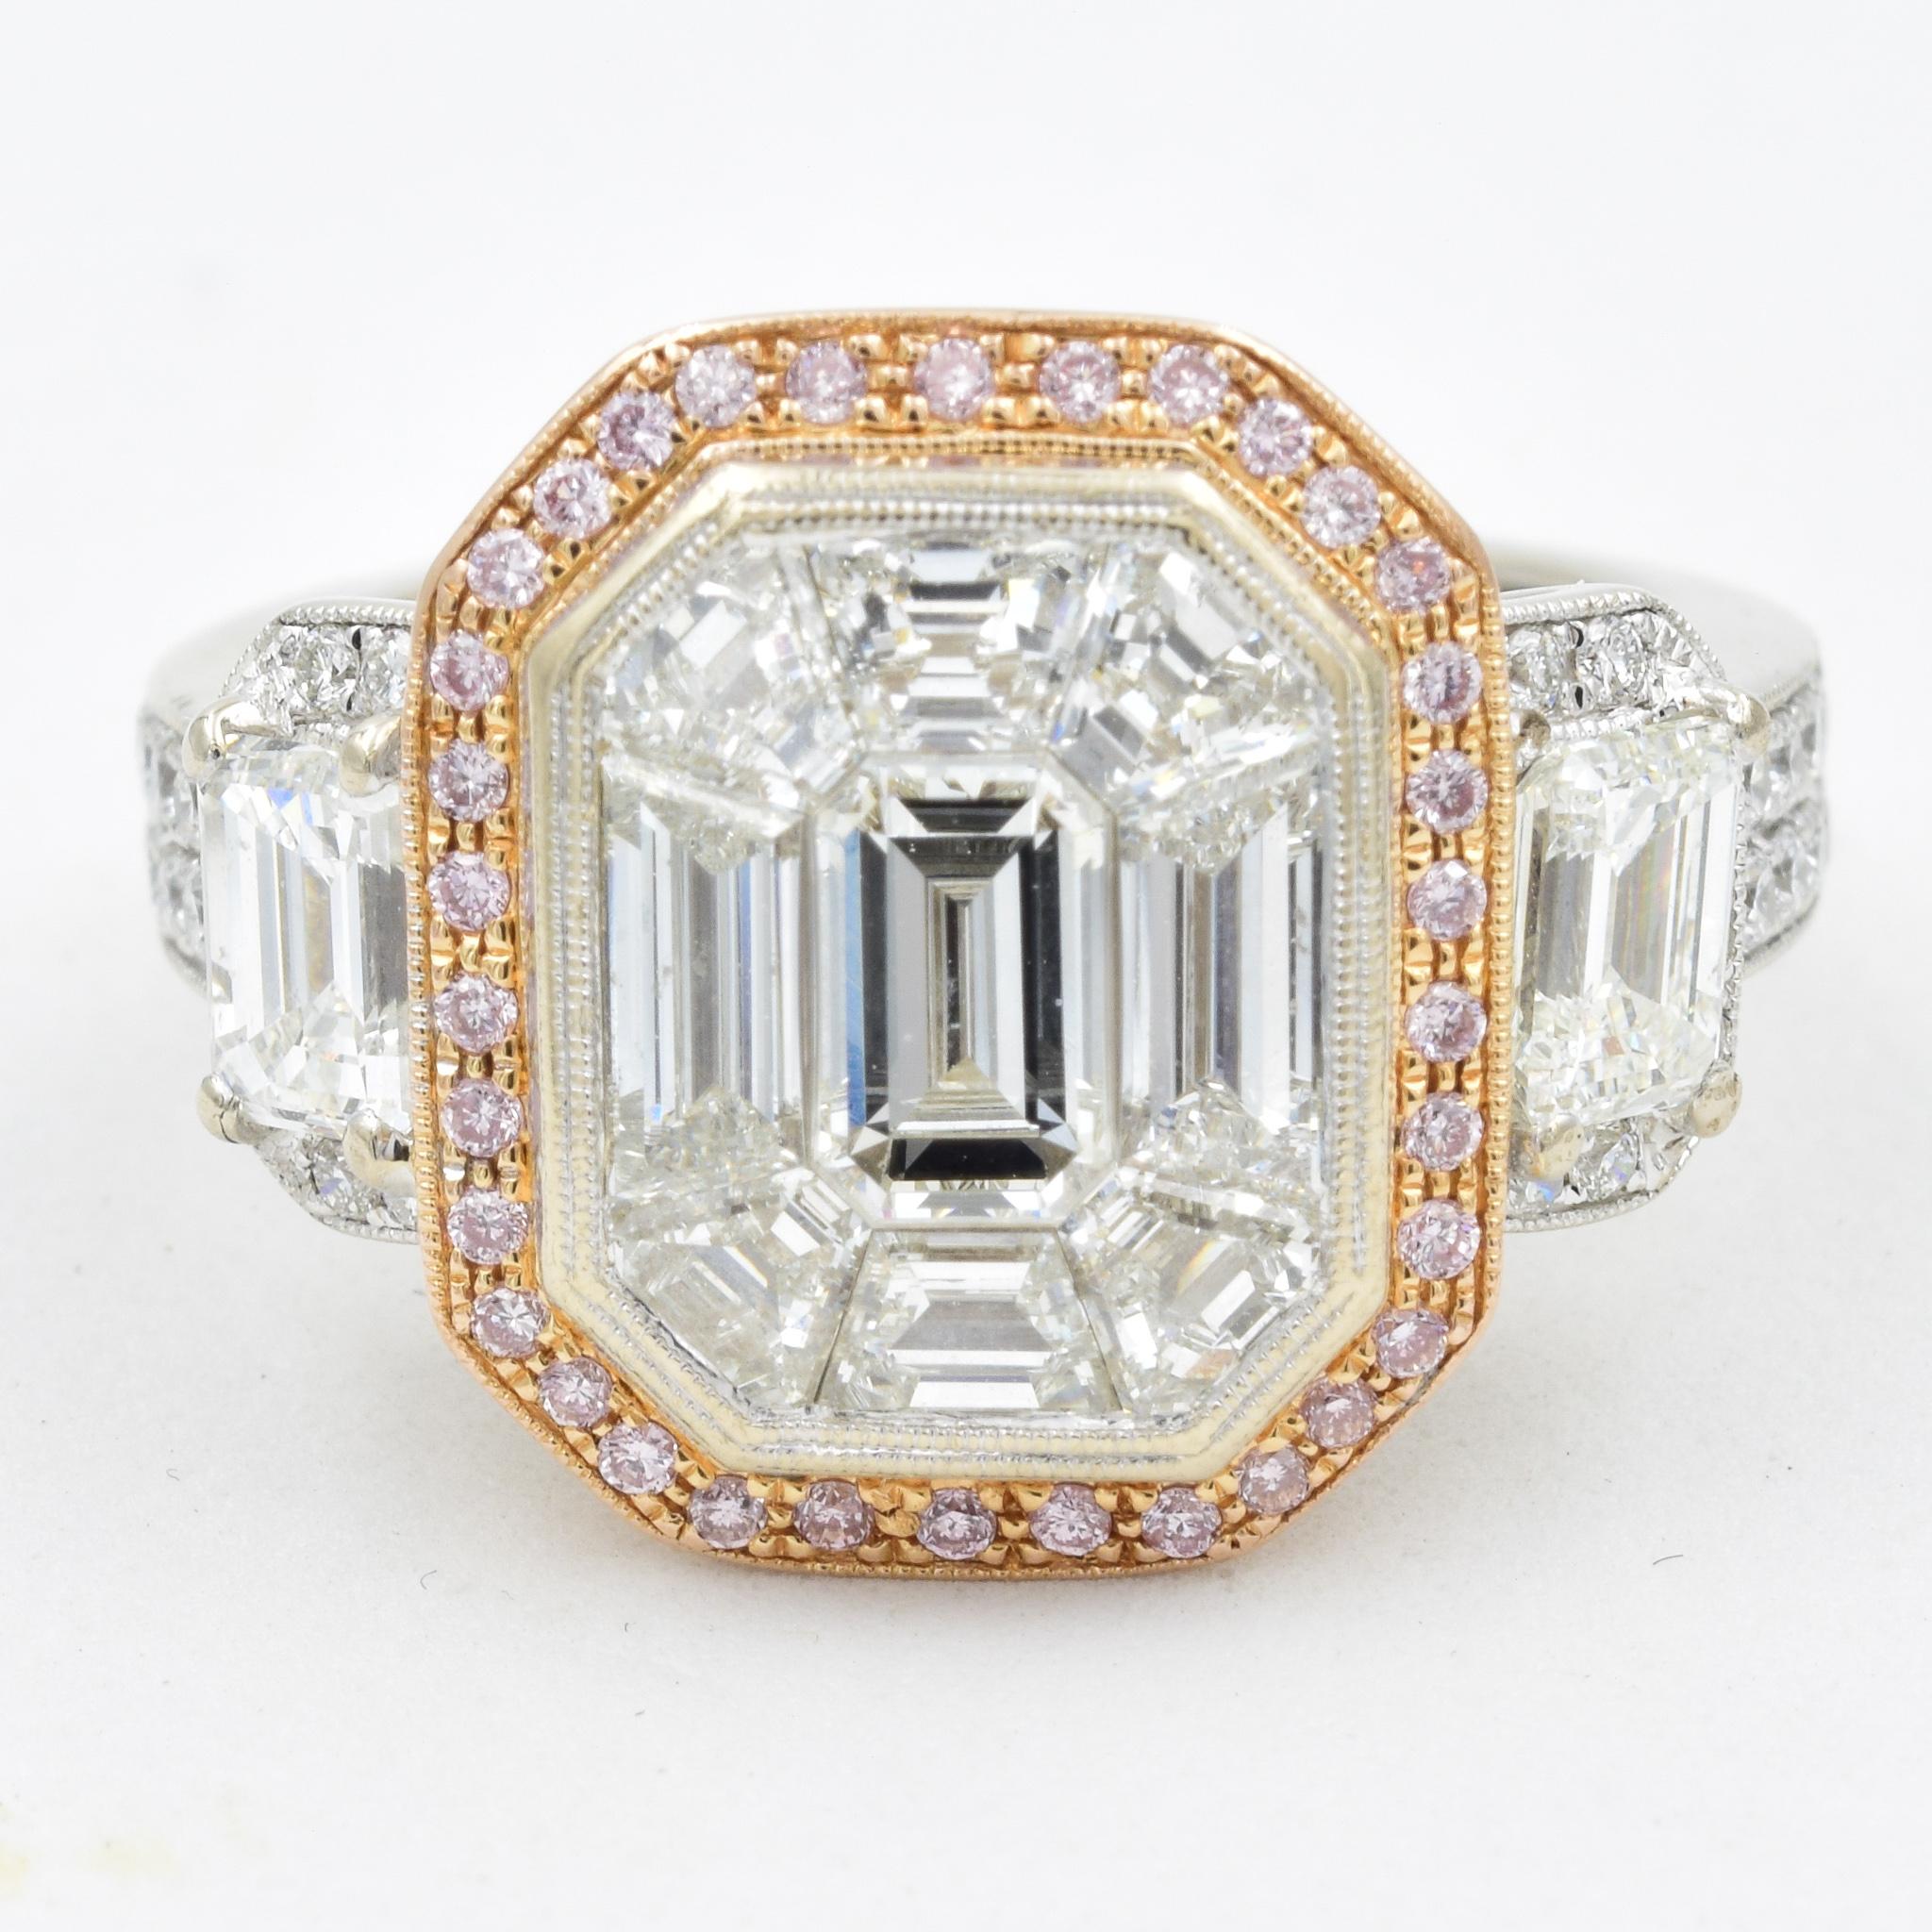 This model is a signature style by Simon G known as the Mosaic Diamond Engagement Ring.  The center mosaic diamonds total approximately 2.25 carats with a center emerald cut which is approximately 0.25 carats.  There are pave diamonds which total